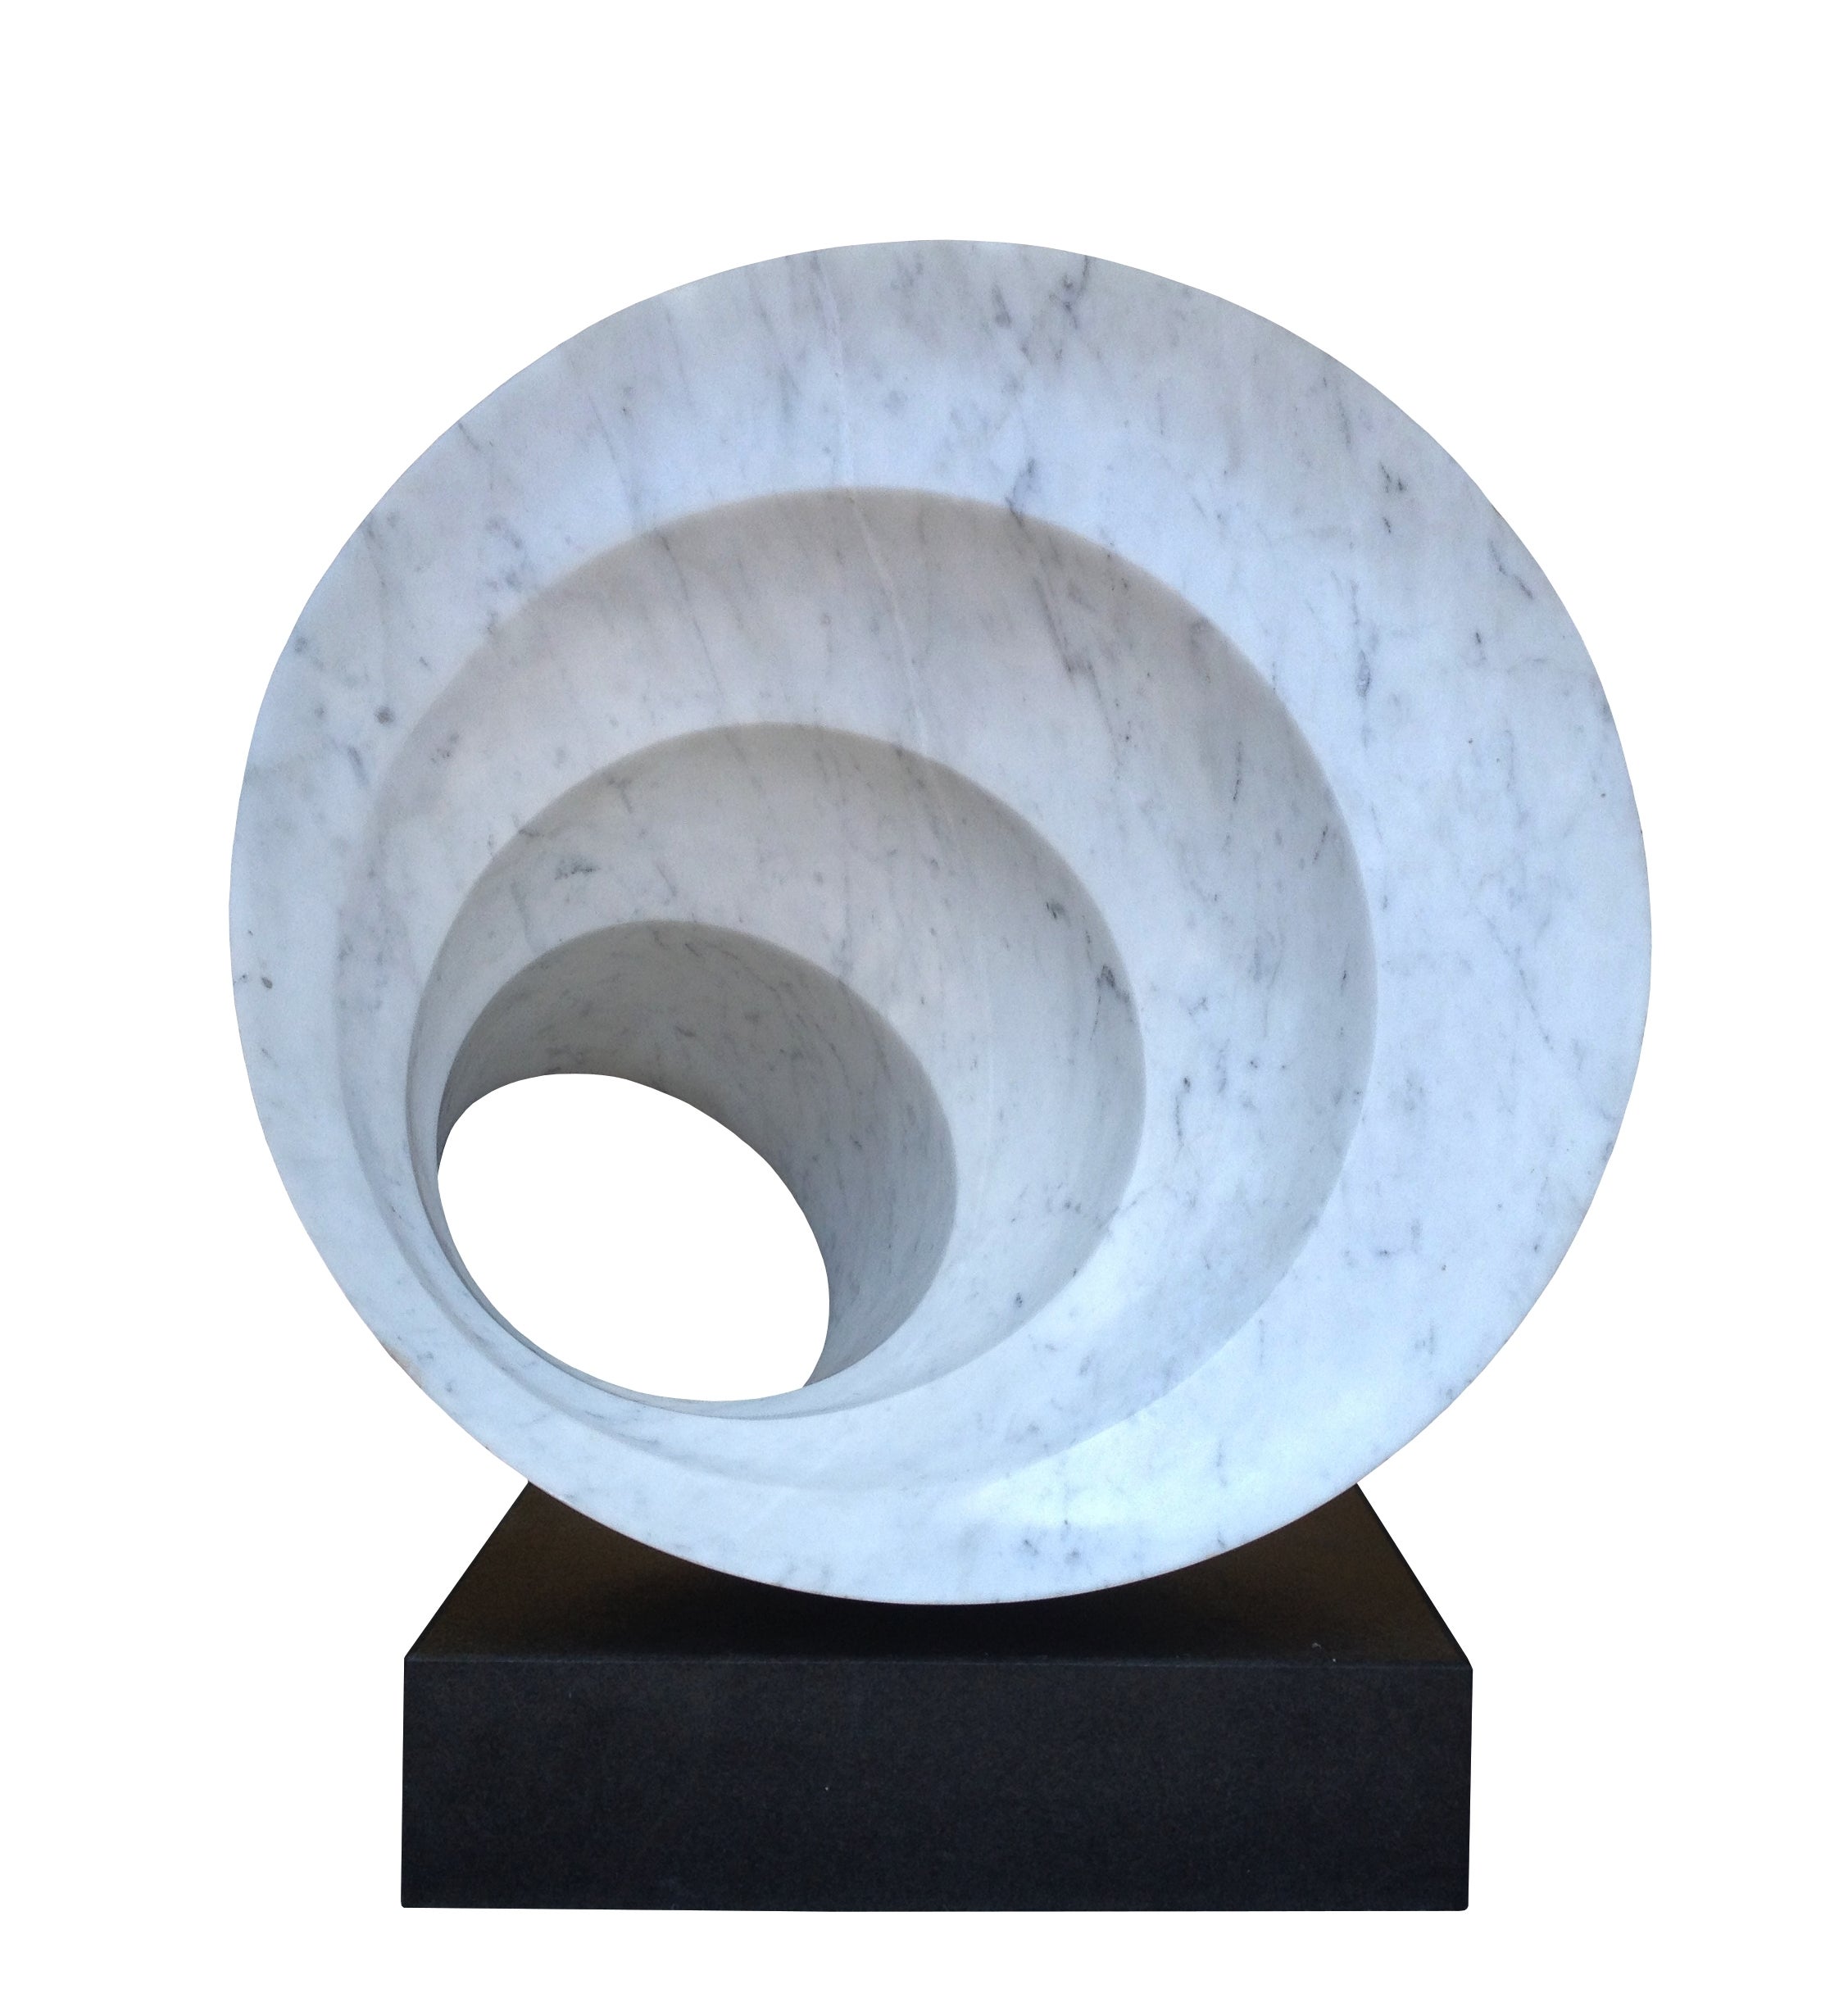 Large Carrara Marble Sculpture on a Granite Base by A. Amato